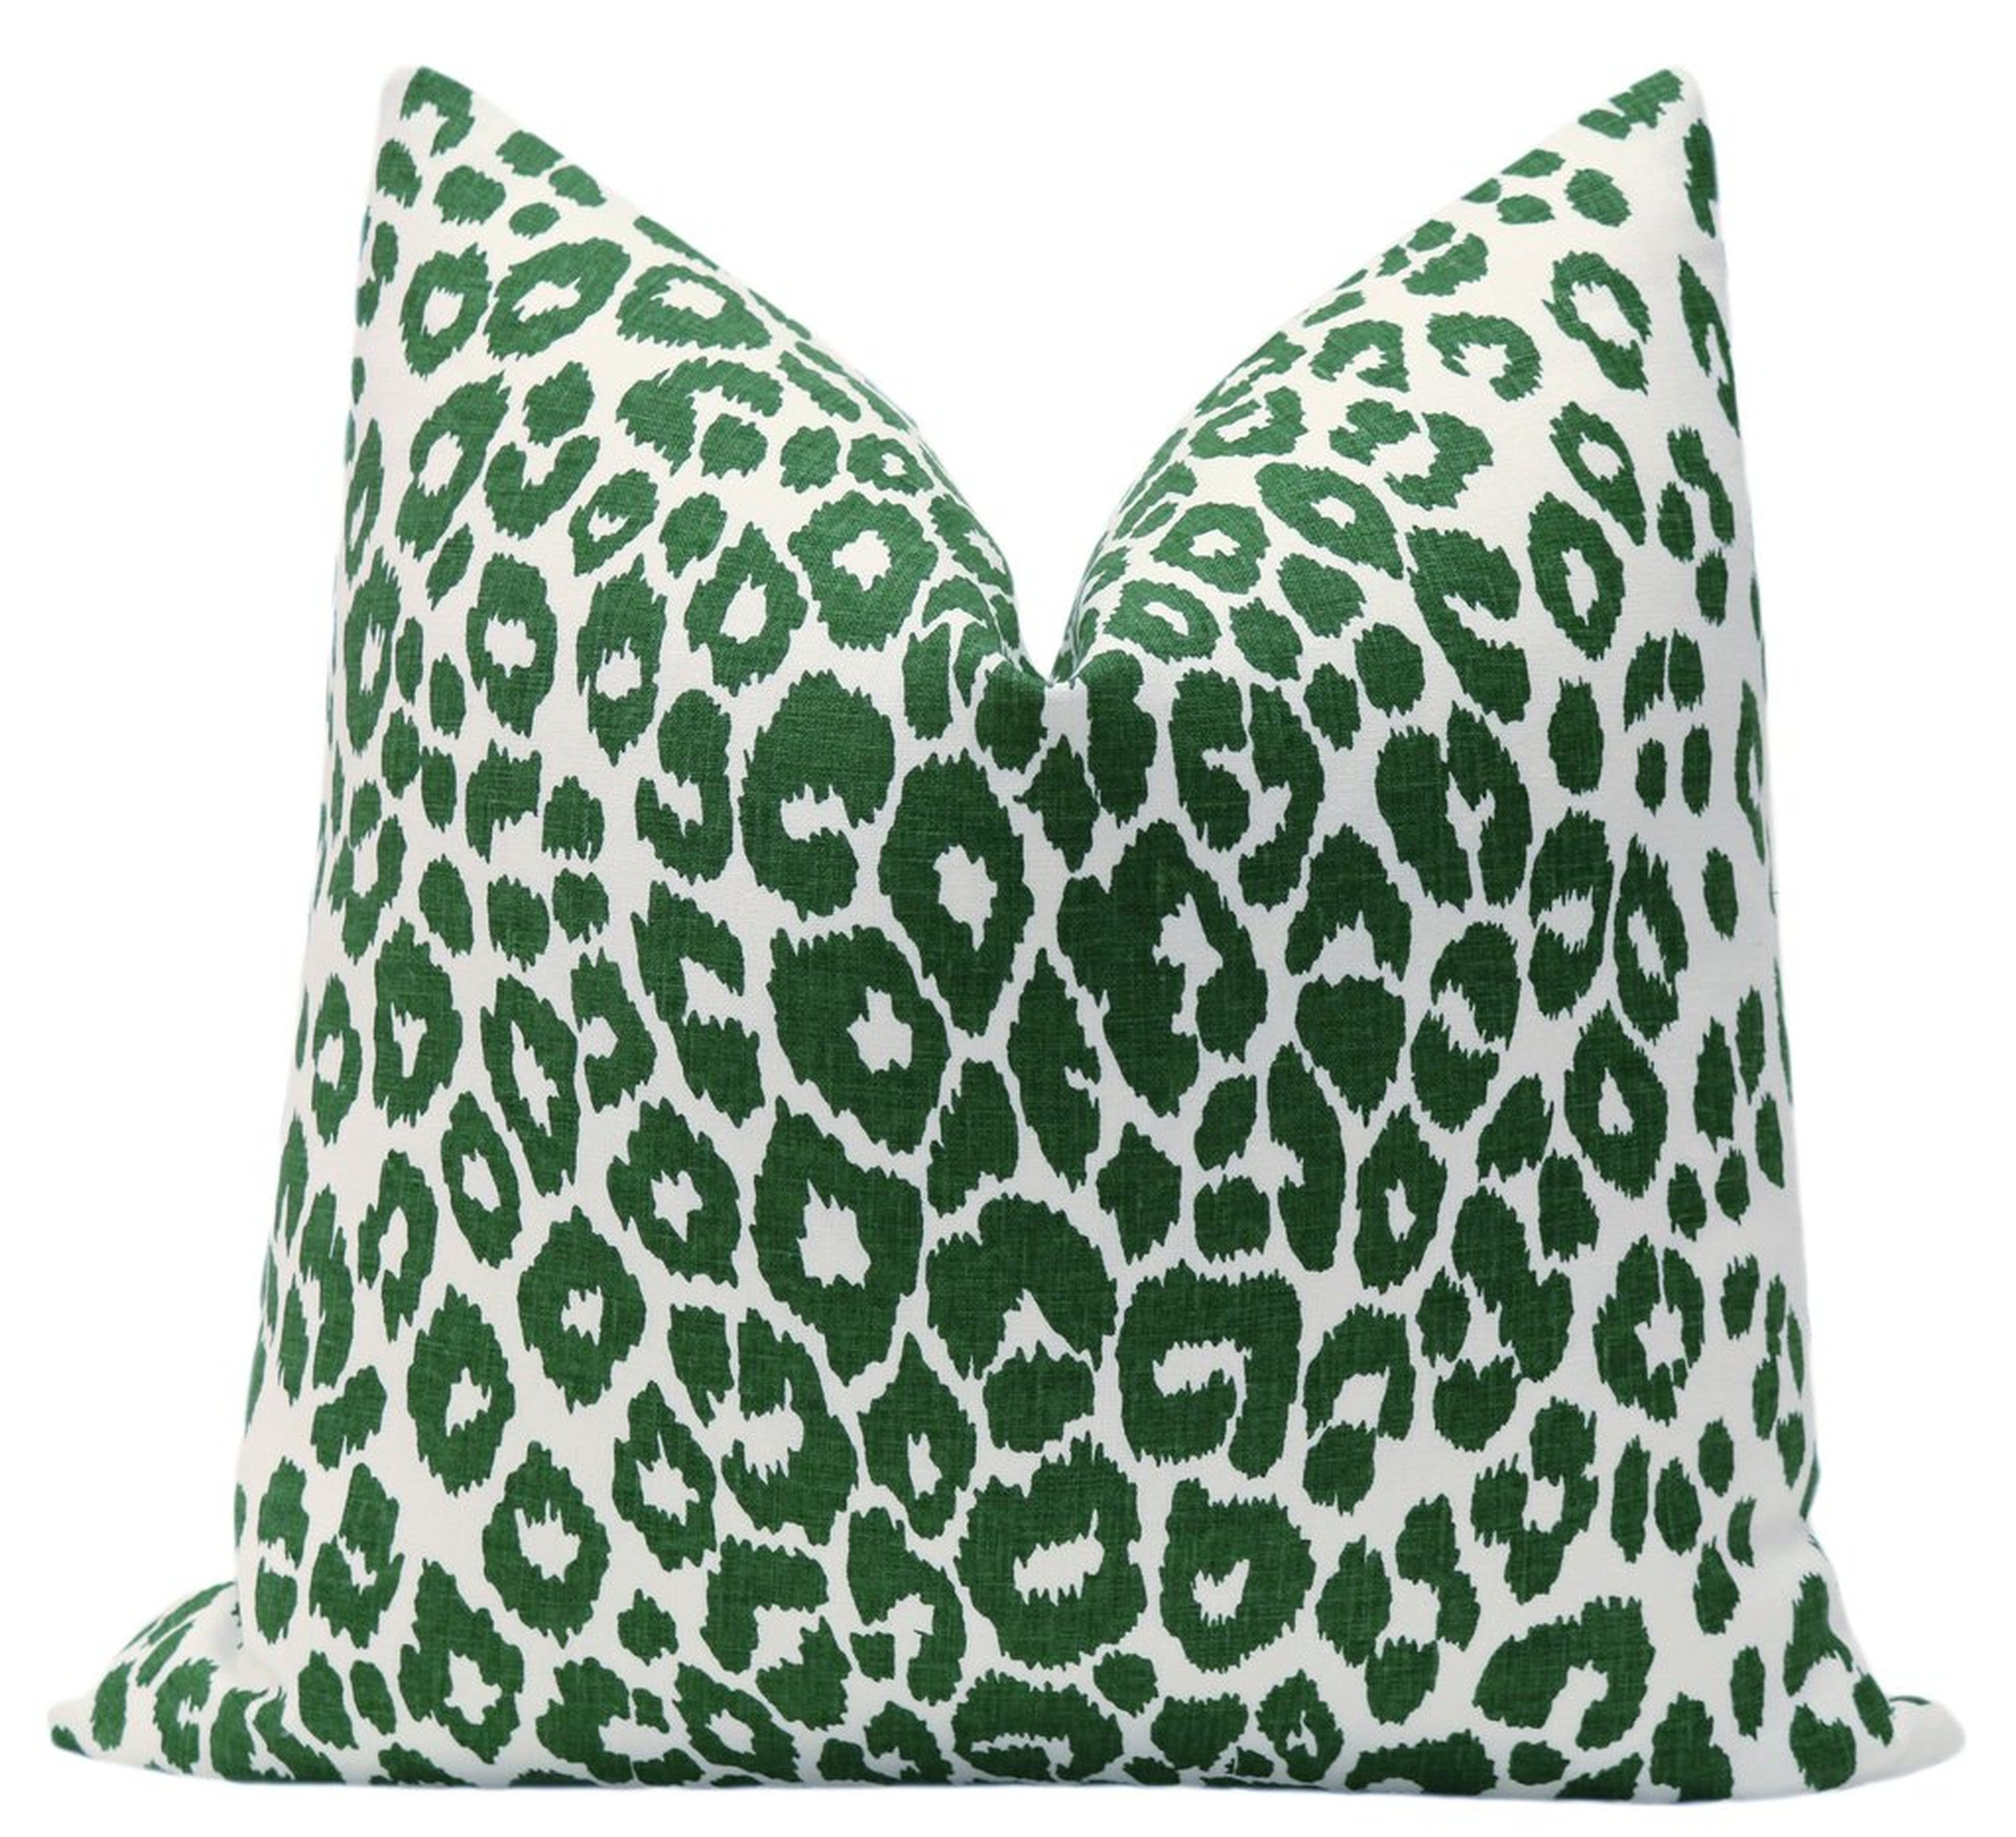 Iconic Leopard Print // Green, 18" Pillow Cover - Little Design Company